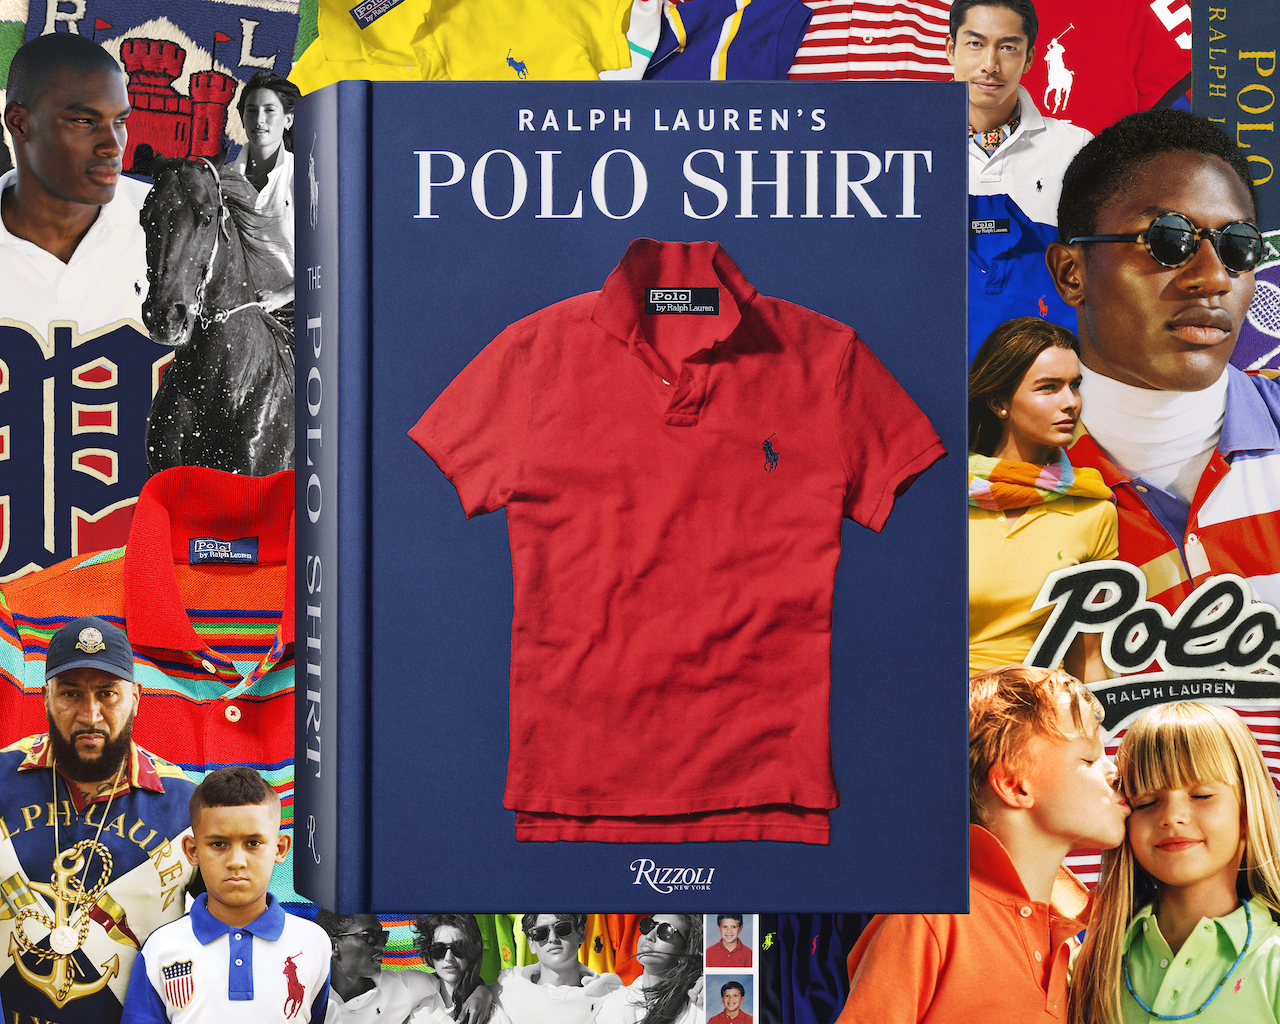 Ralph Lauren Celebrates the Polo Shirt's 50th Anniversary with New Book